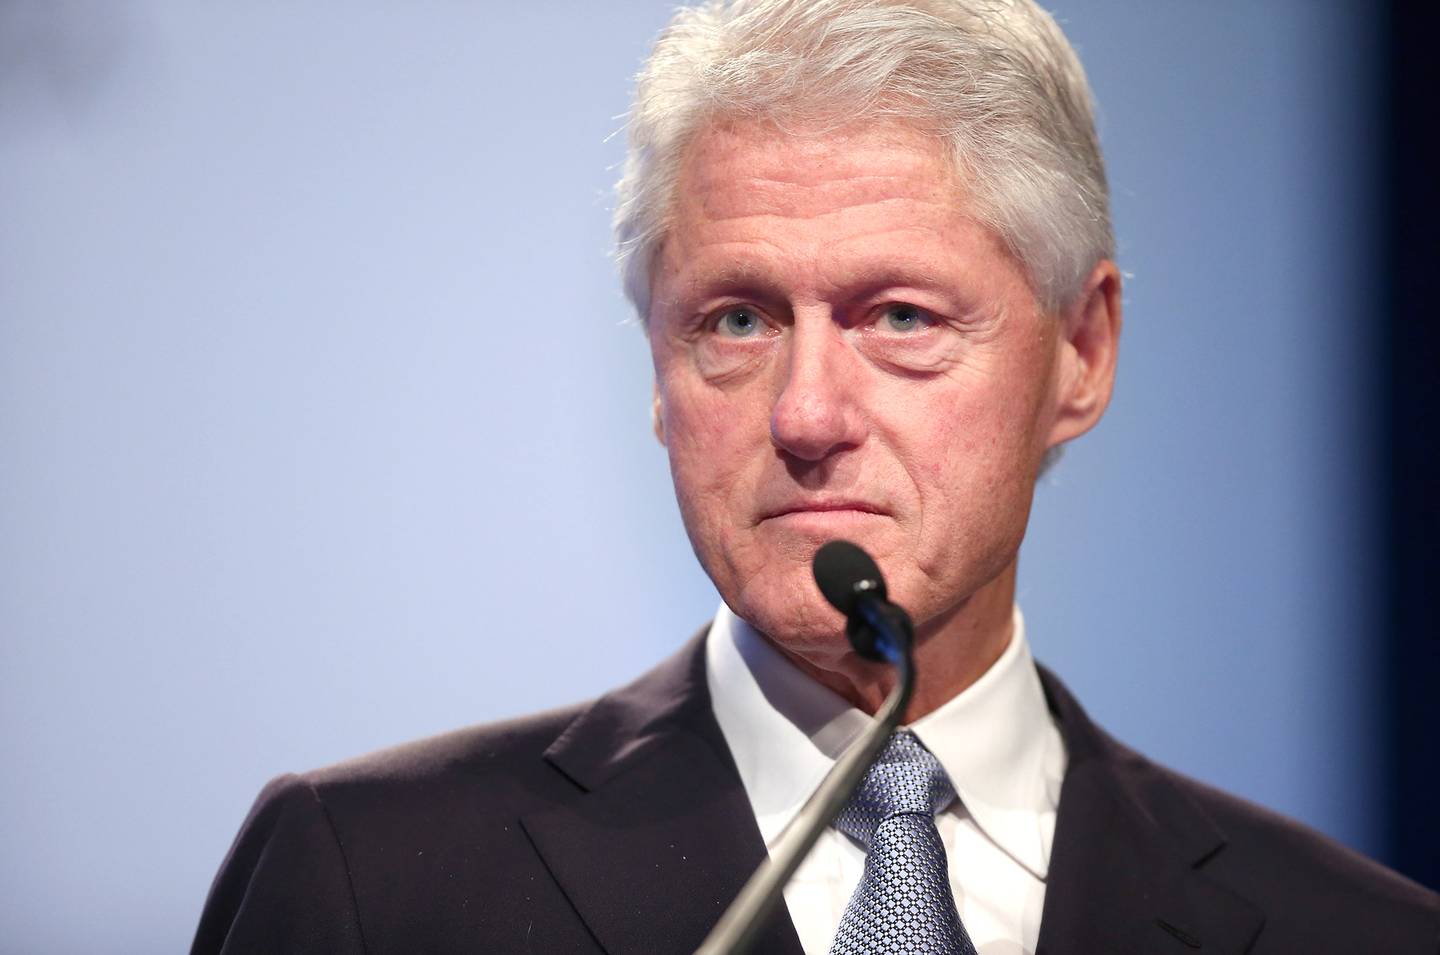 Bill Clinton to Have High-Profile Role at Democratic Convention | News ...